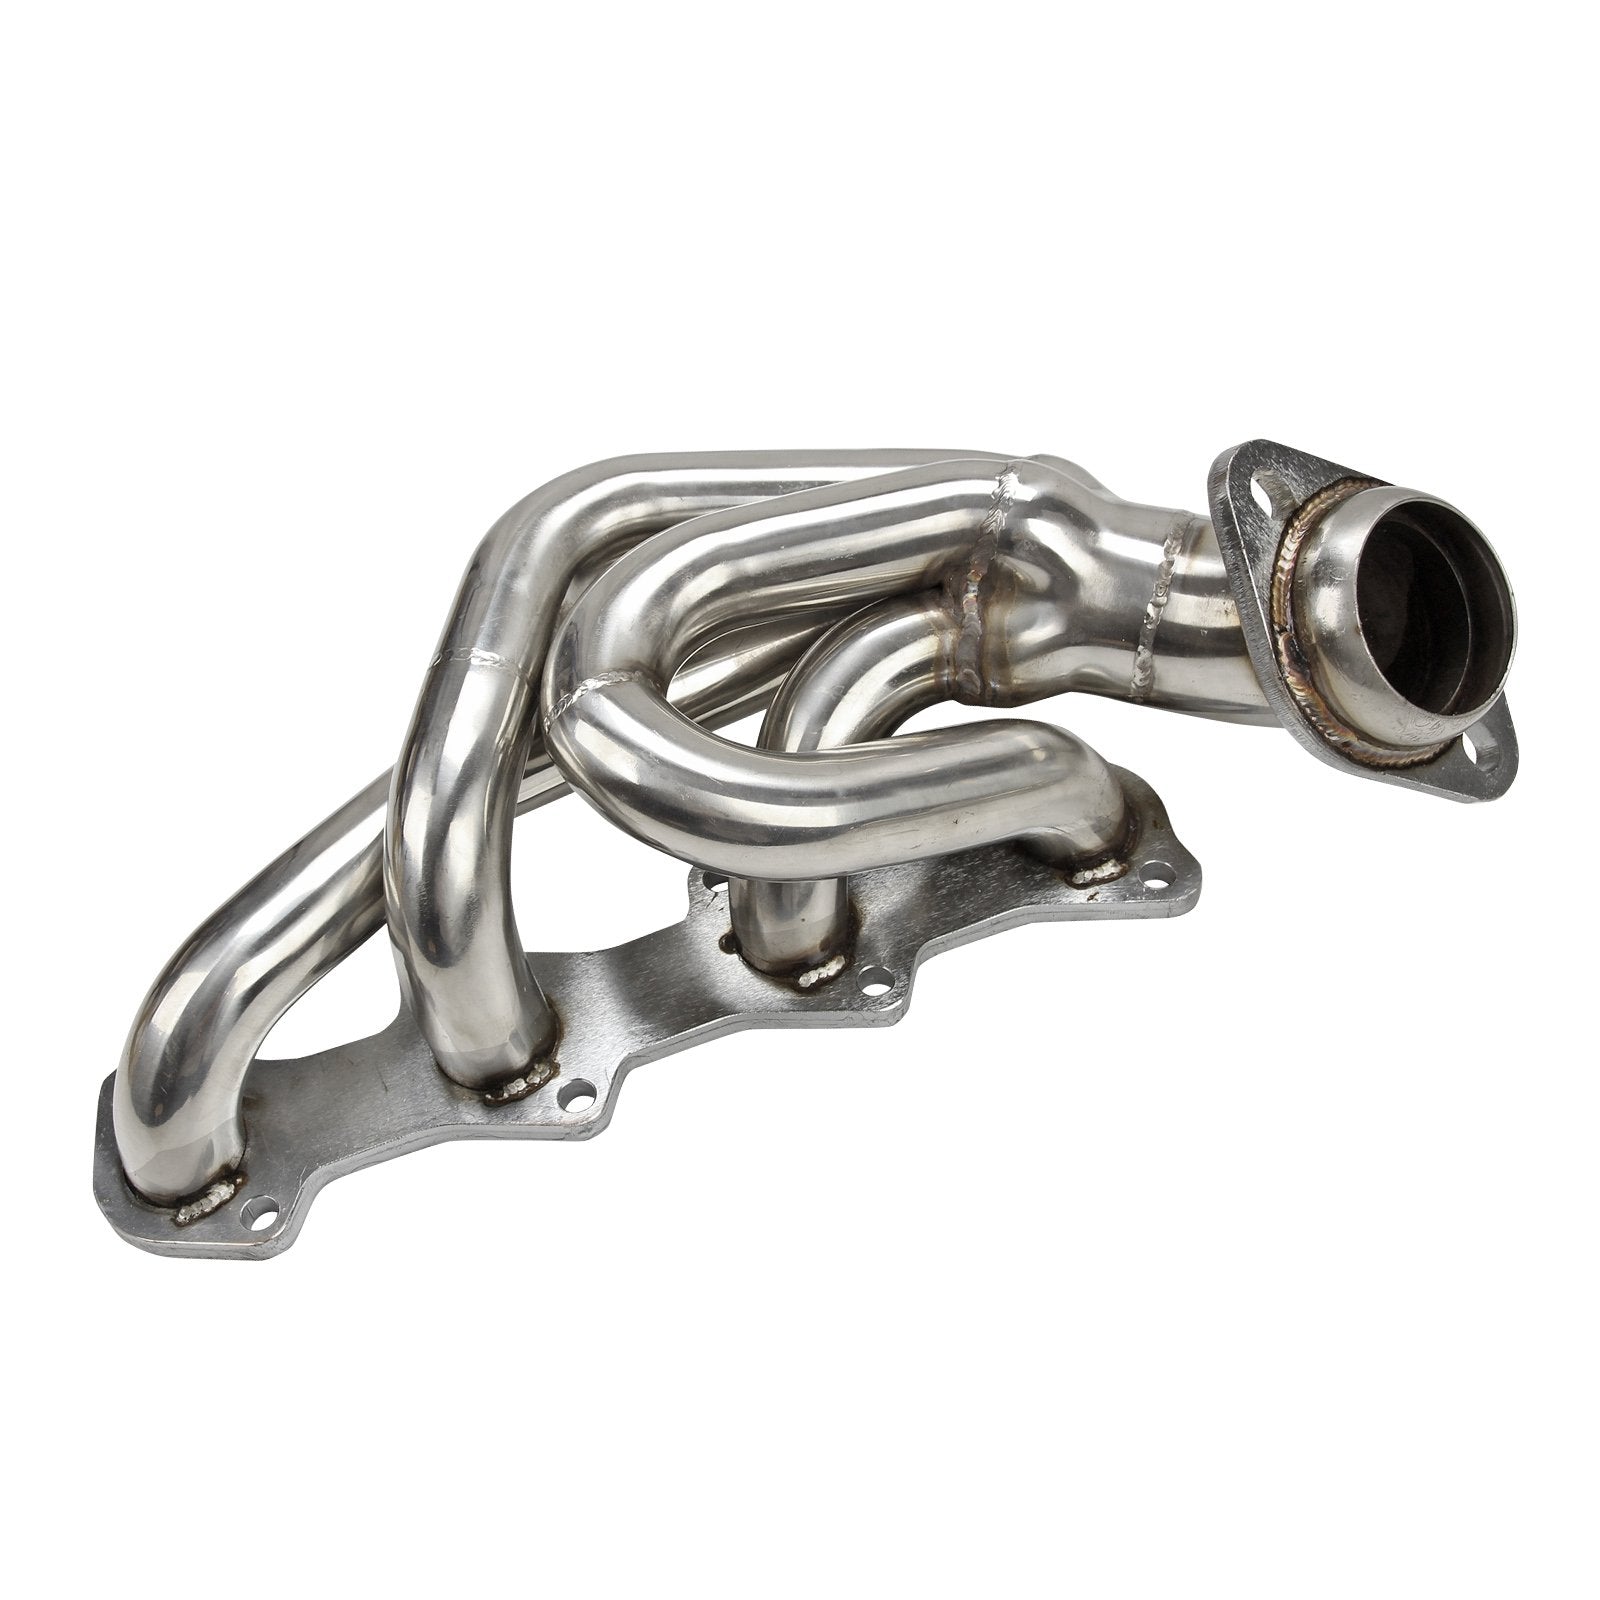 Exhaust Shorty Header For 1997-2003 Ford F150 F250 V8 4.6L - 0